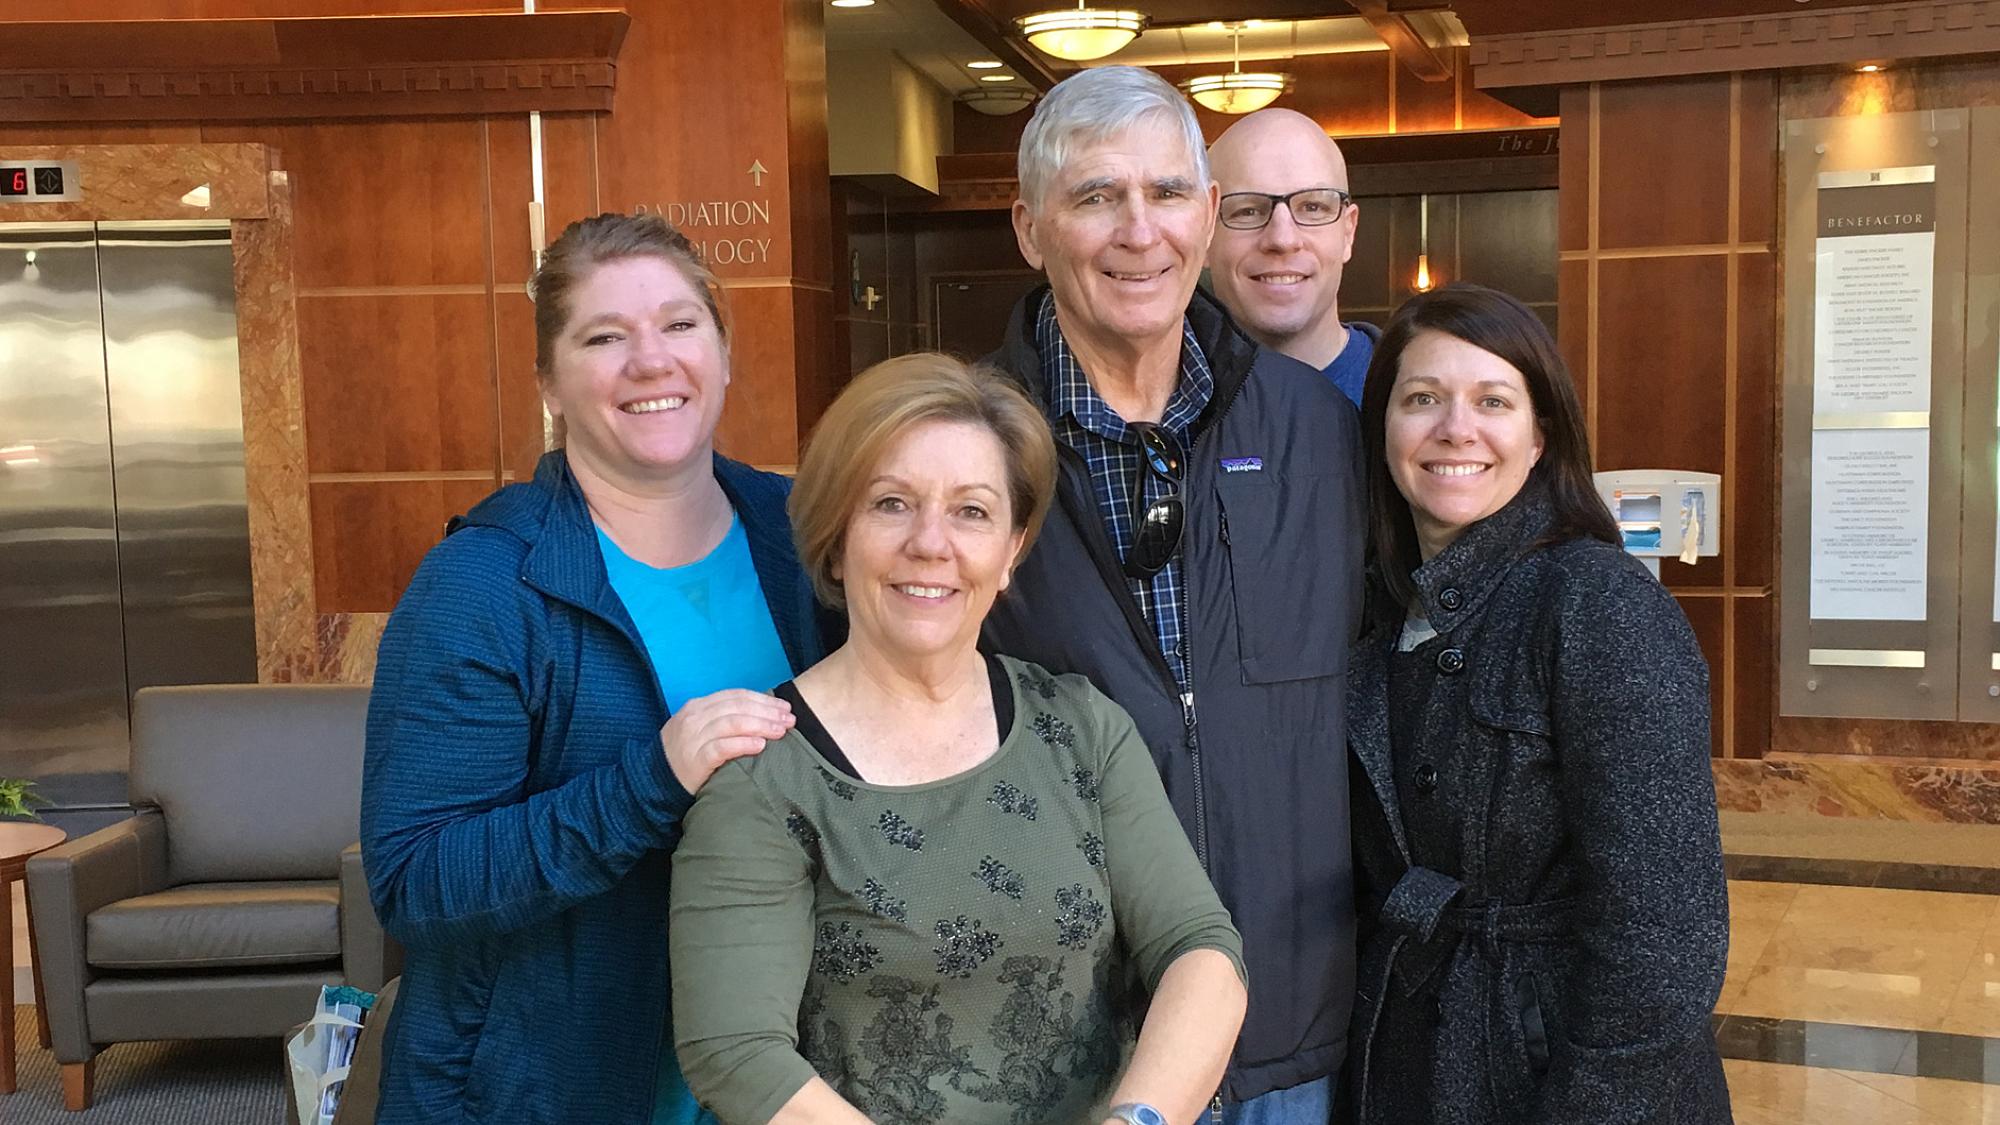 Jerry and his family at Huntsman Cancer Institute in 2017, just after his diagnosis.